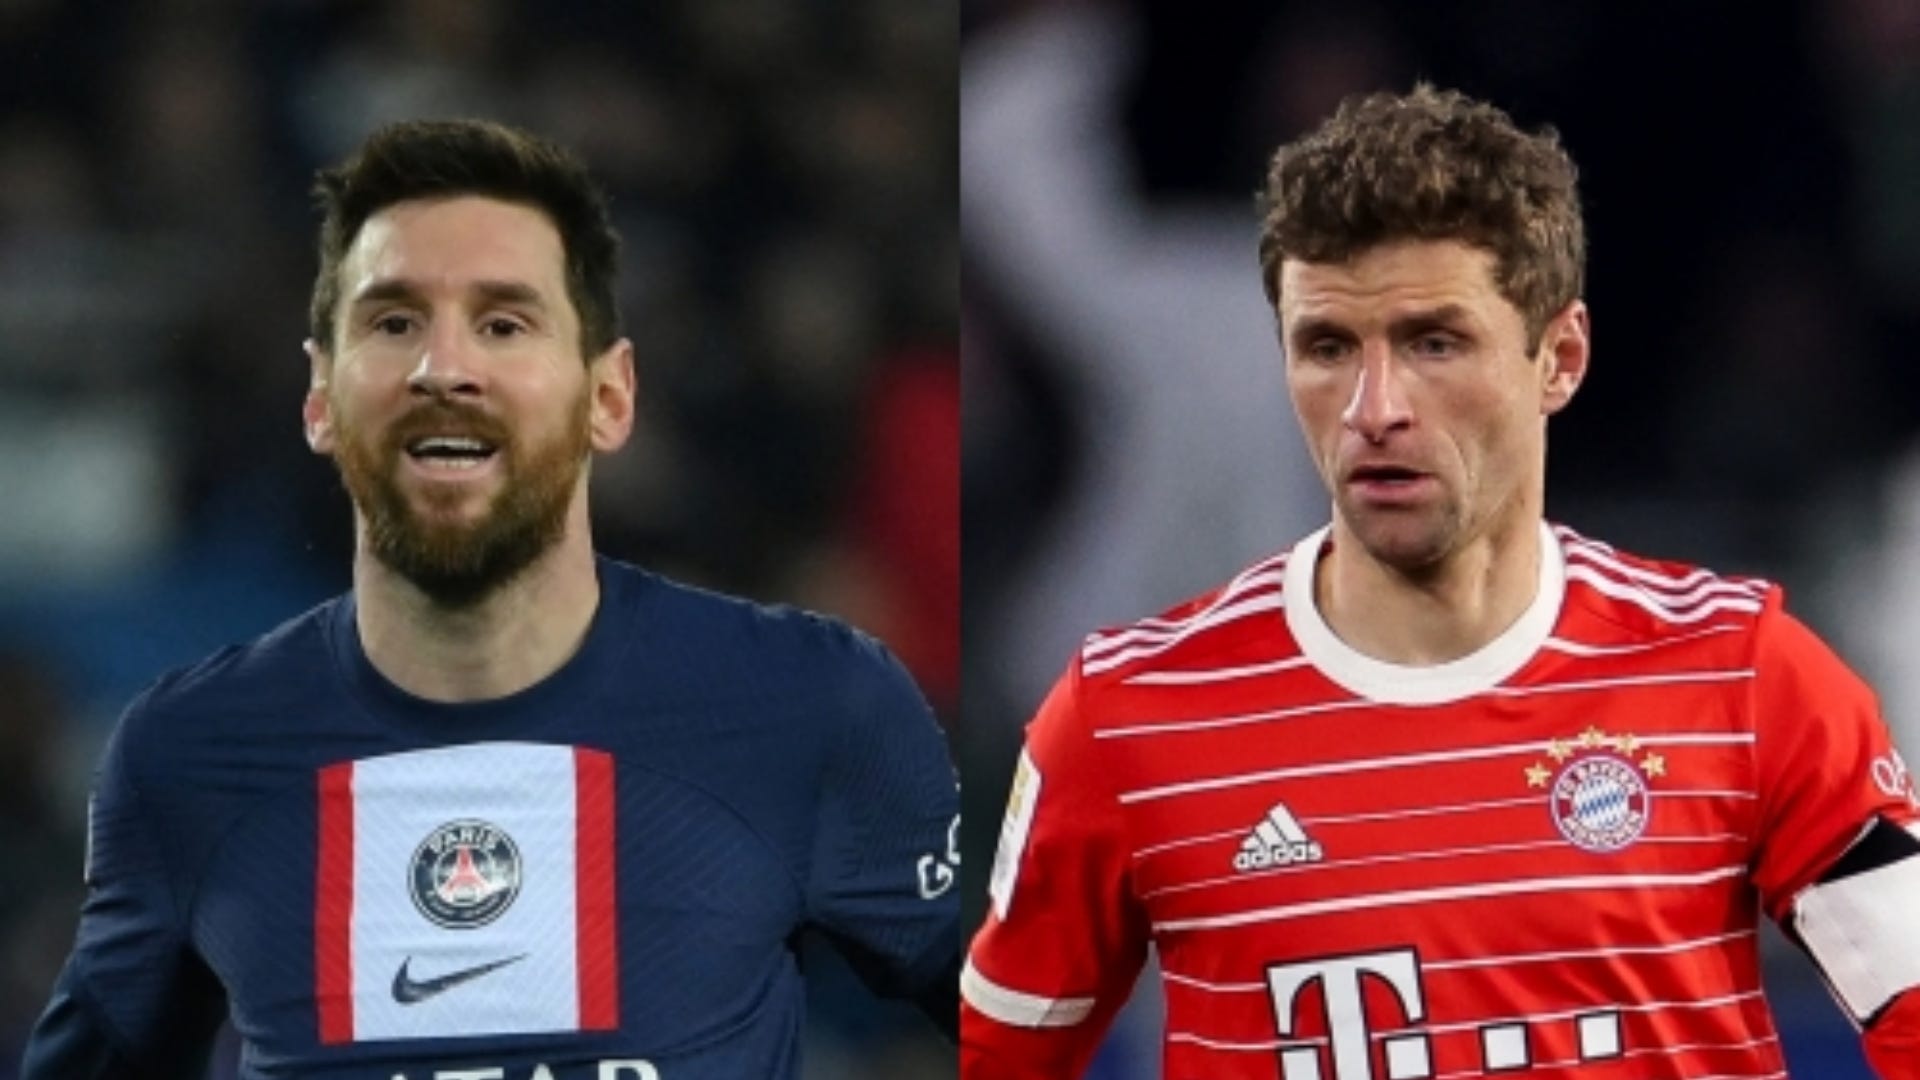 PSG vs Bayern Munich Live stream, TV channel, kick-off time and where to watch Goal India